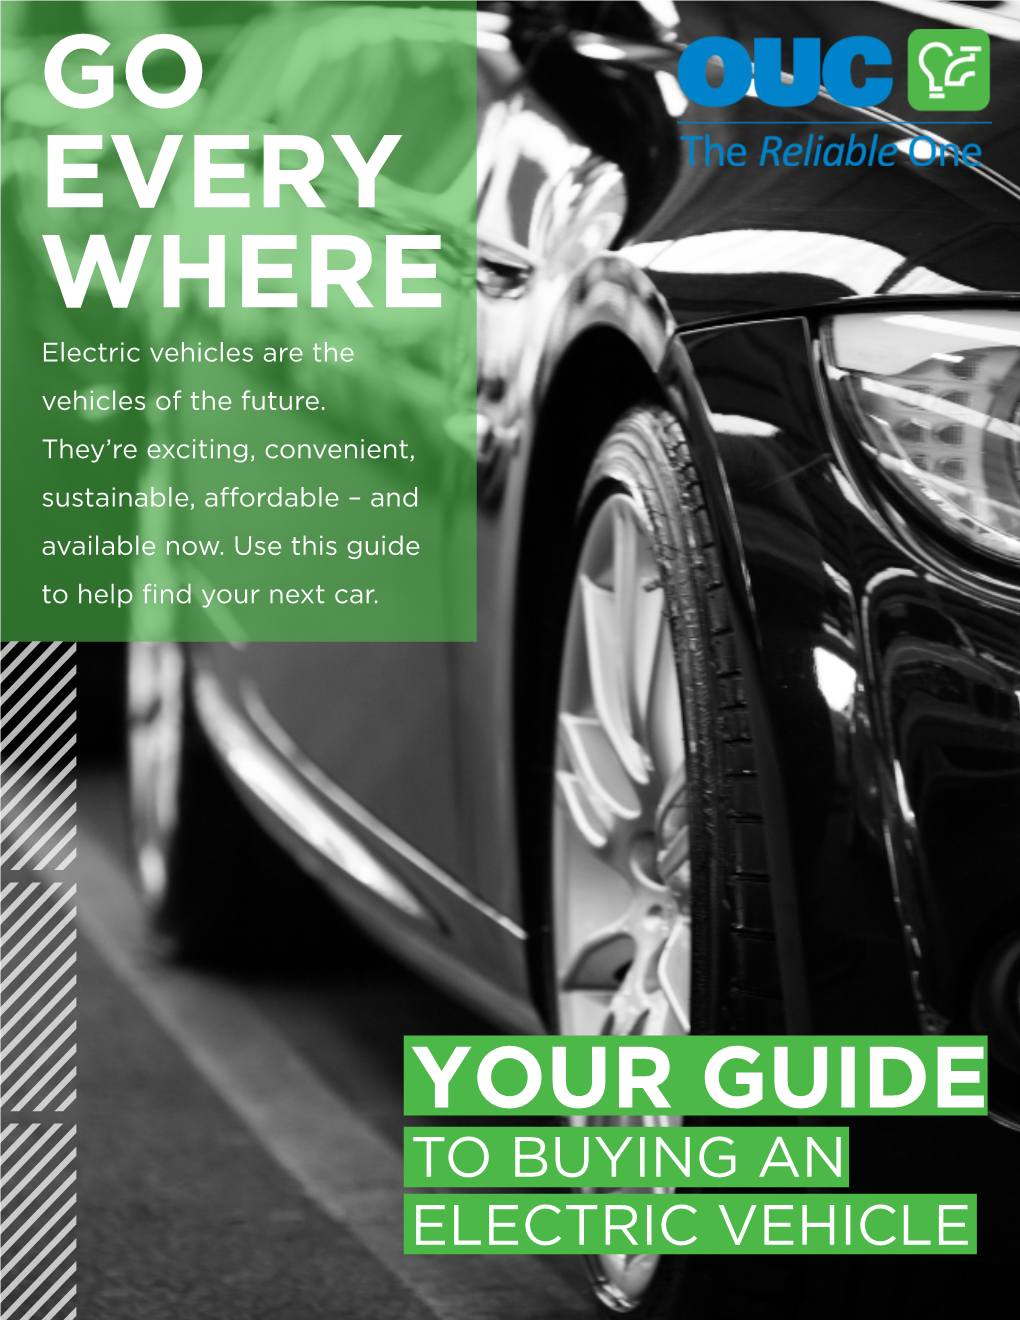 Download OUC's 2021 Buyer's Guide